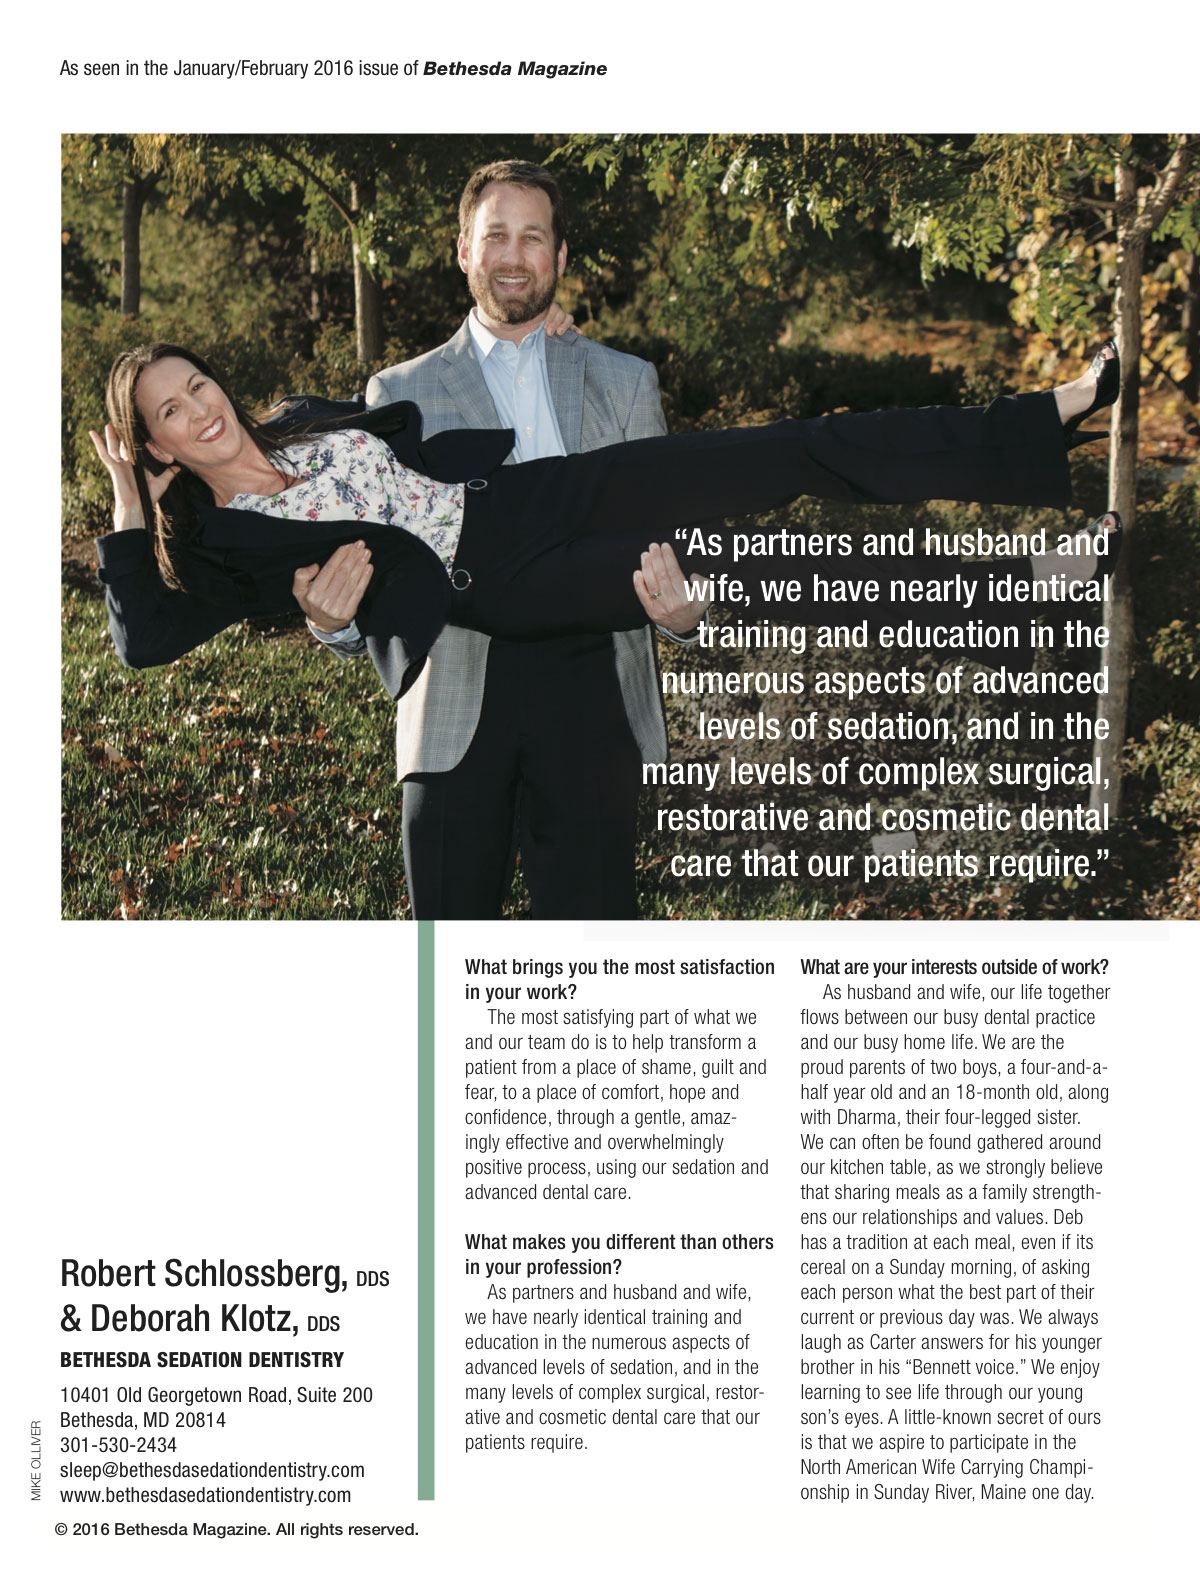 Interview with Robert Schlossberg and Deborah Klotz, DDS for January/February 2016 issue of Bethesda Magazine